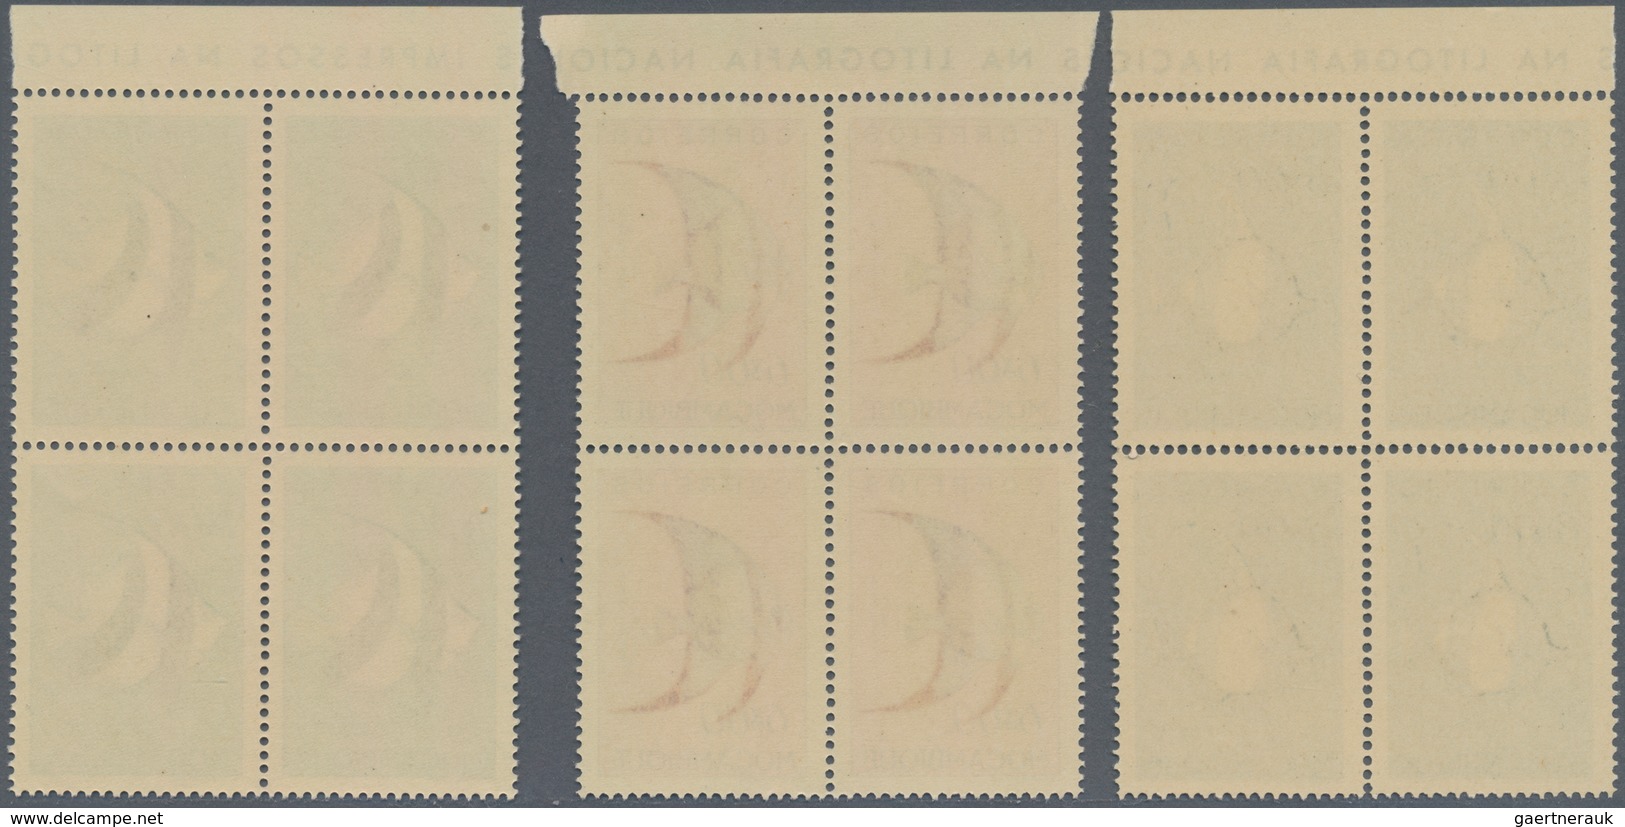 Mocambique: 1951, Fishes, 24 values complete mint never hinged, many in blocks of four. Rare set! Mi